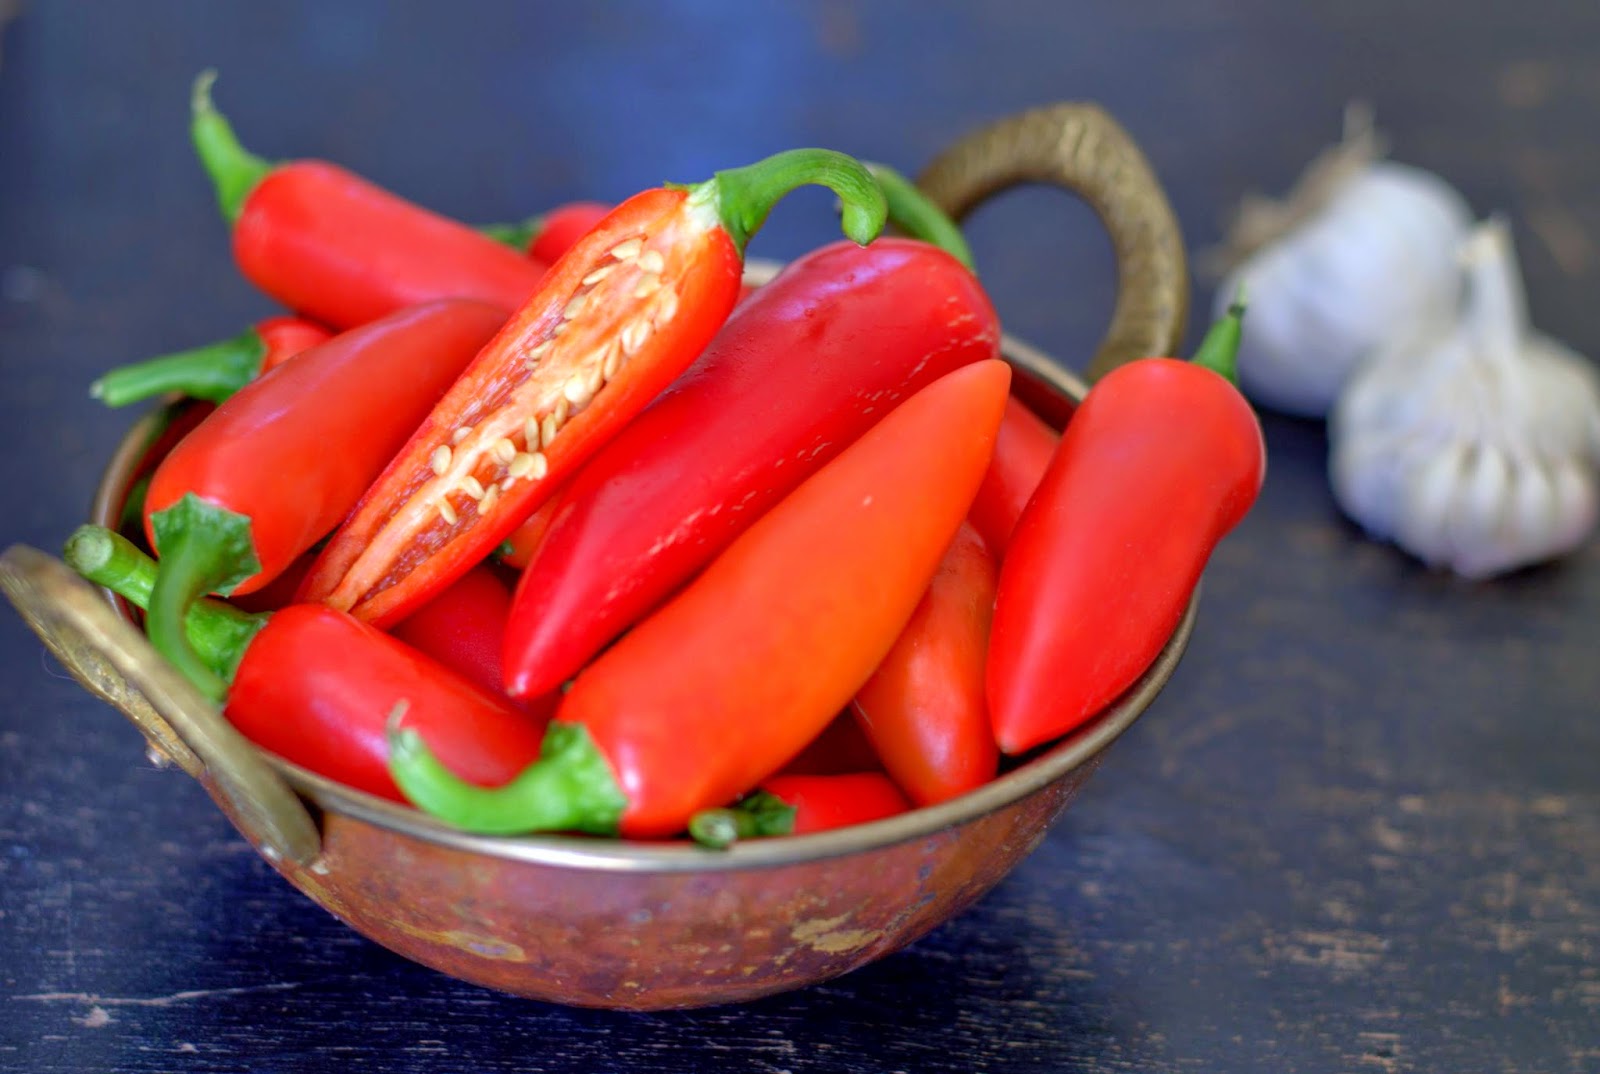 red chilies for my harissa